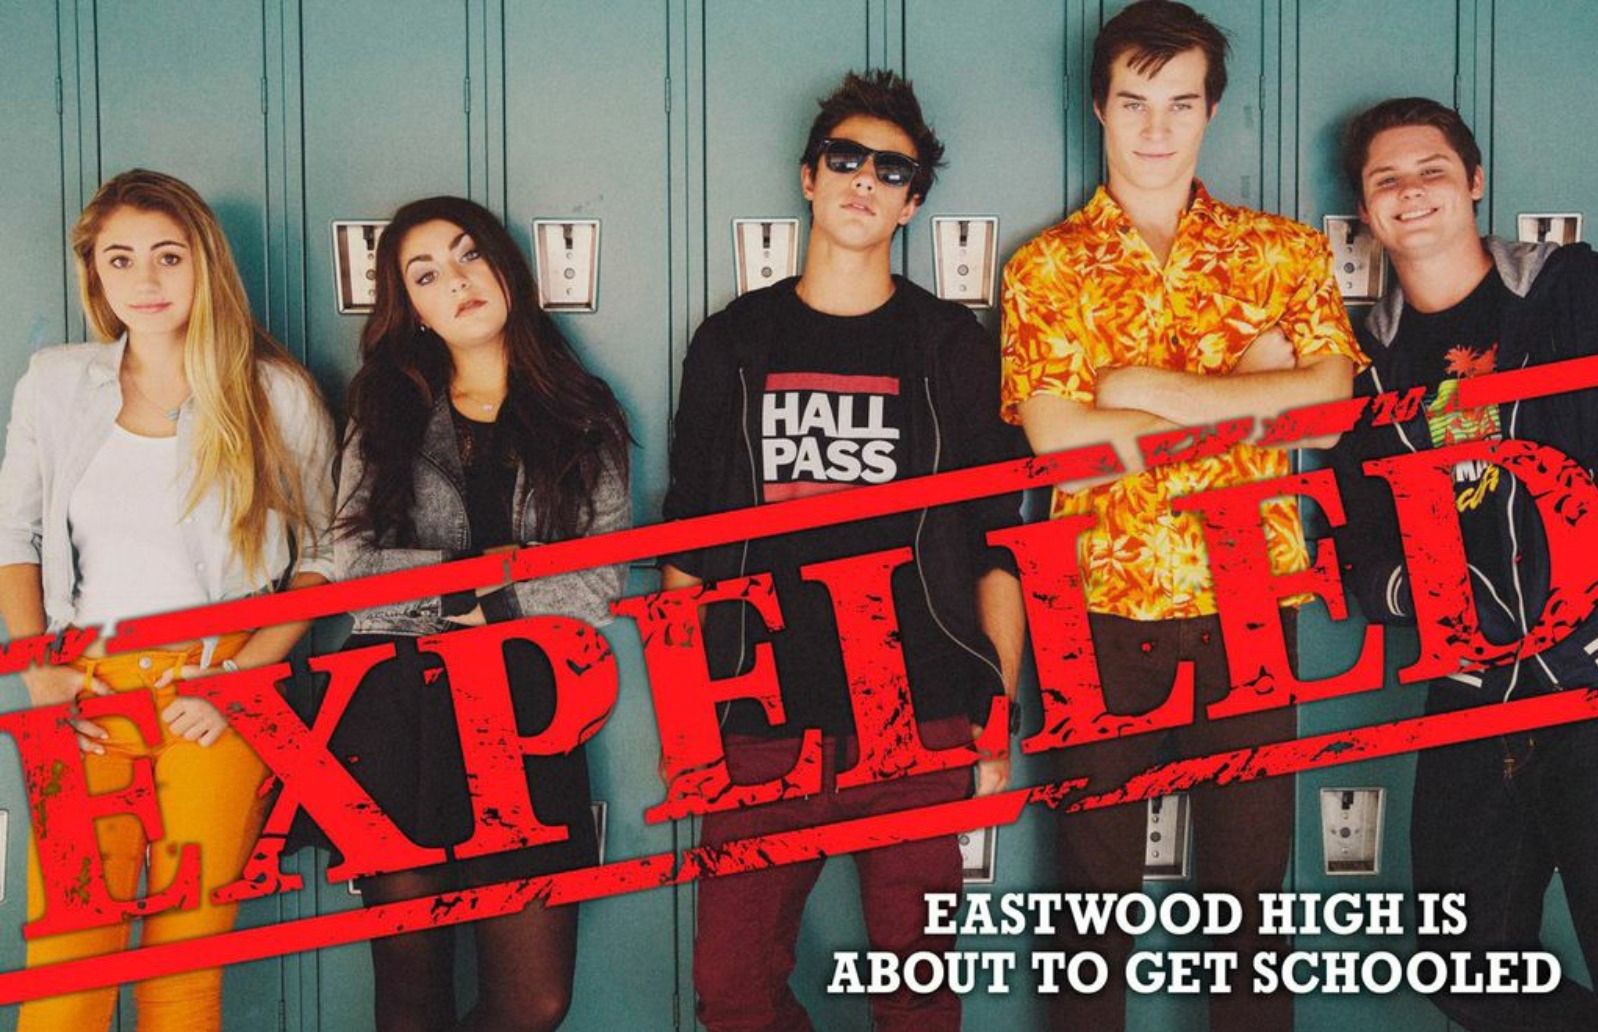 Expelled banner